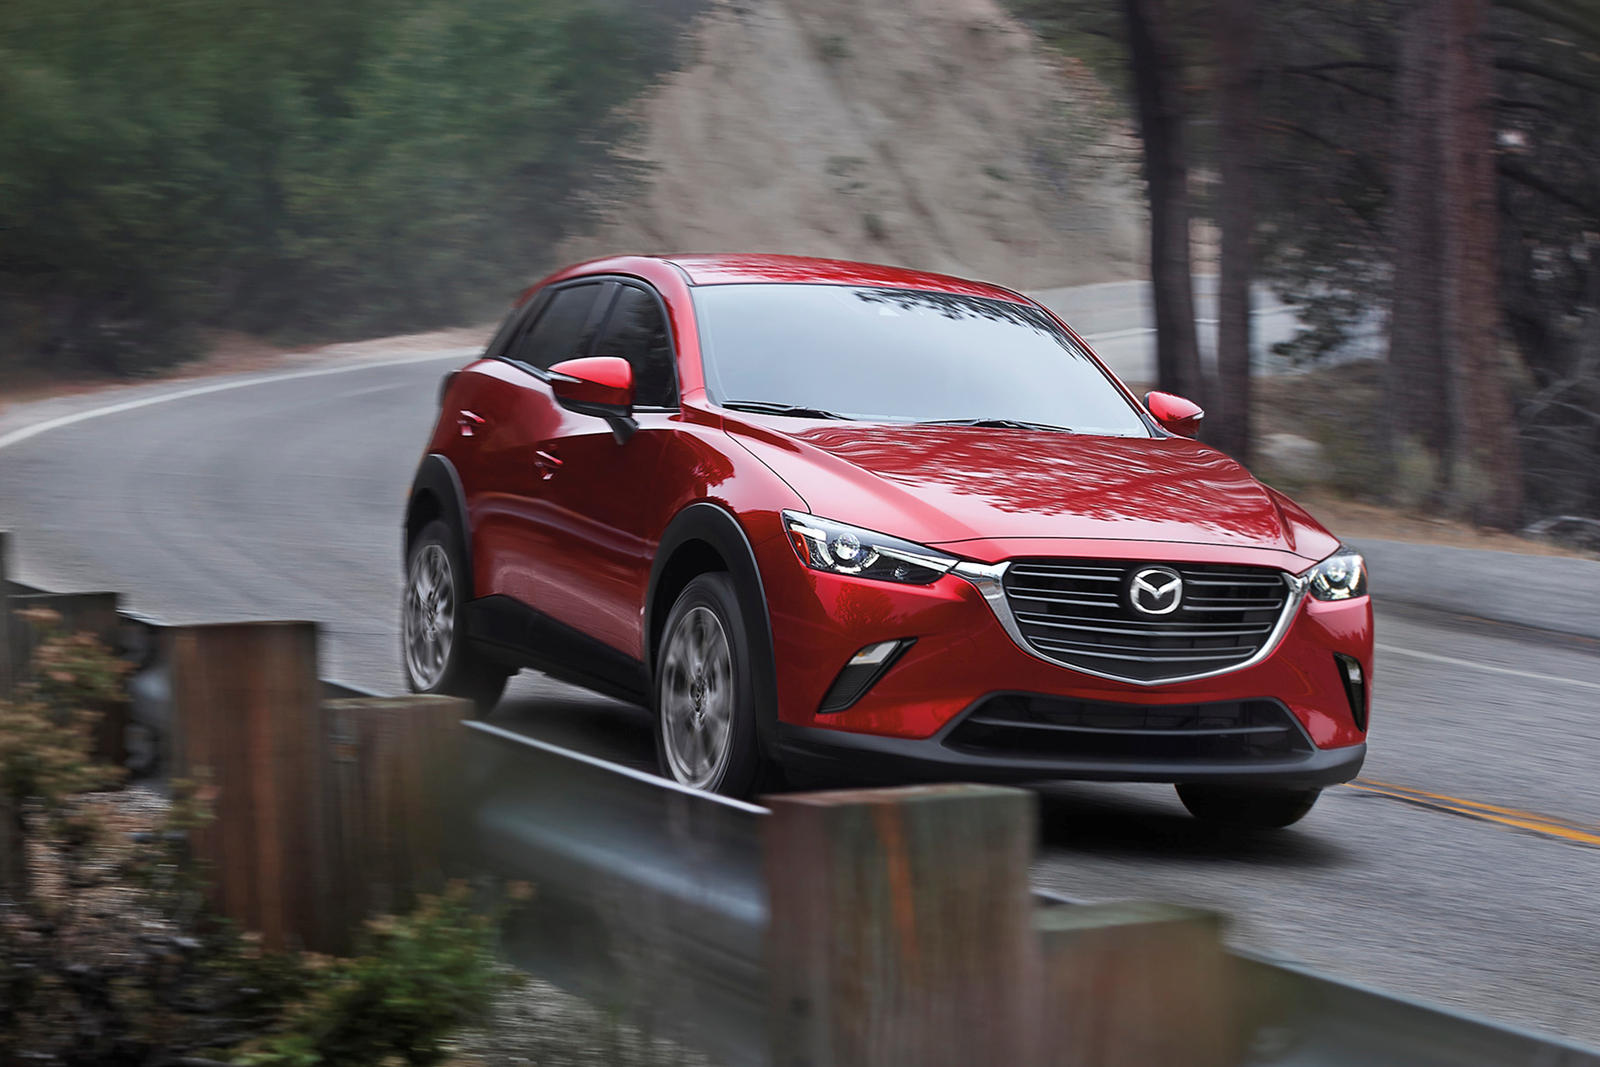 2021 Mazda CX-3 Front View Driving